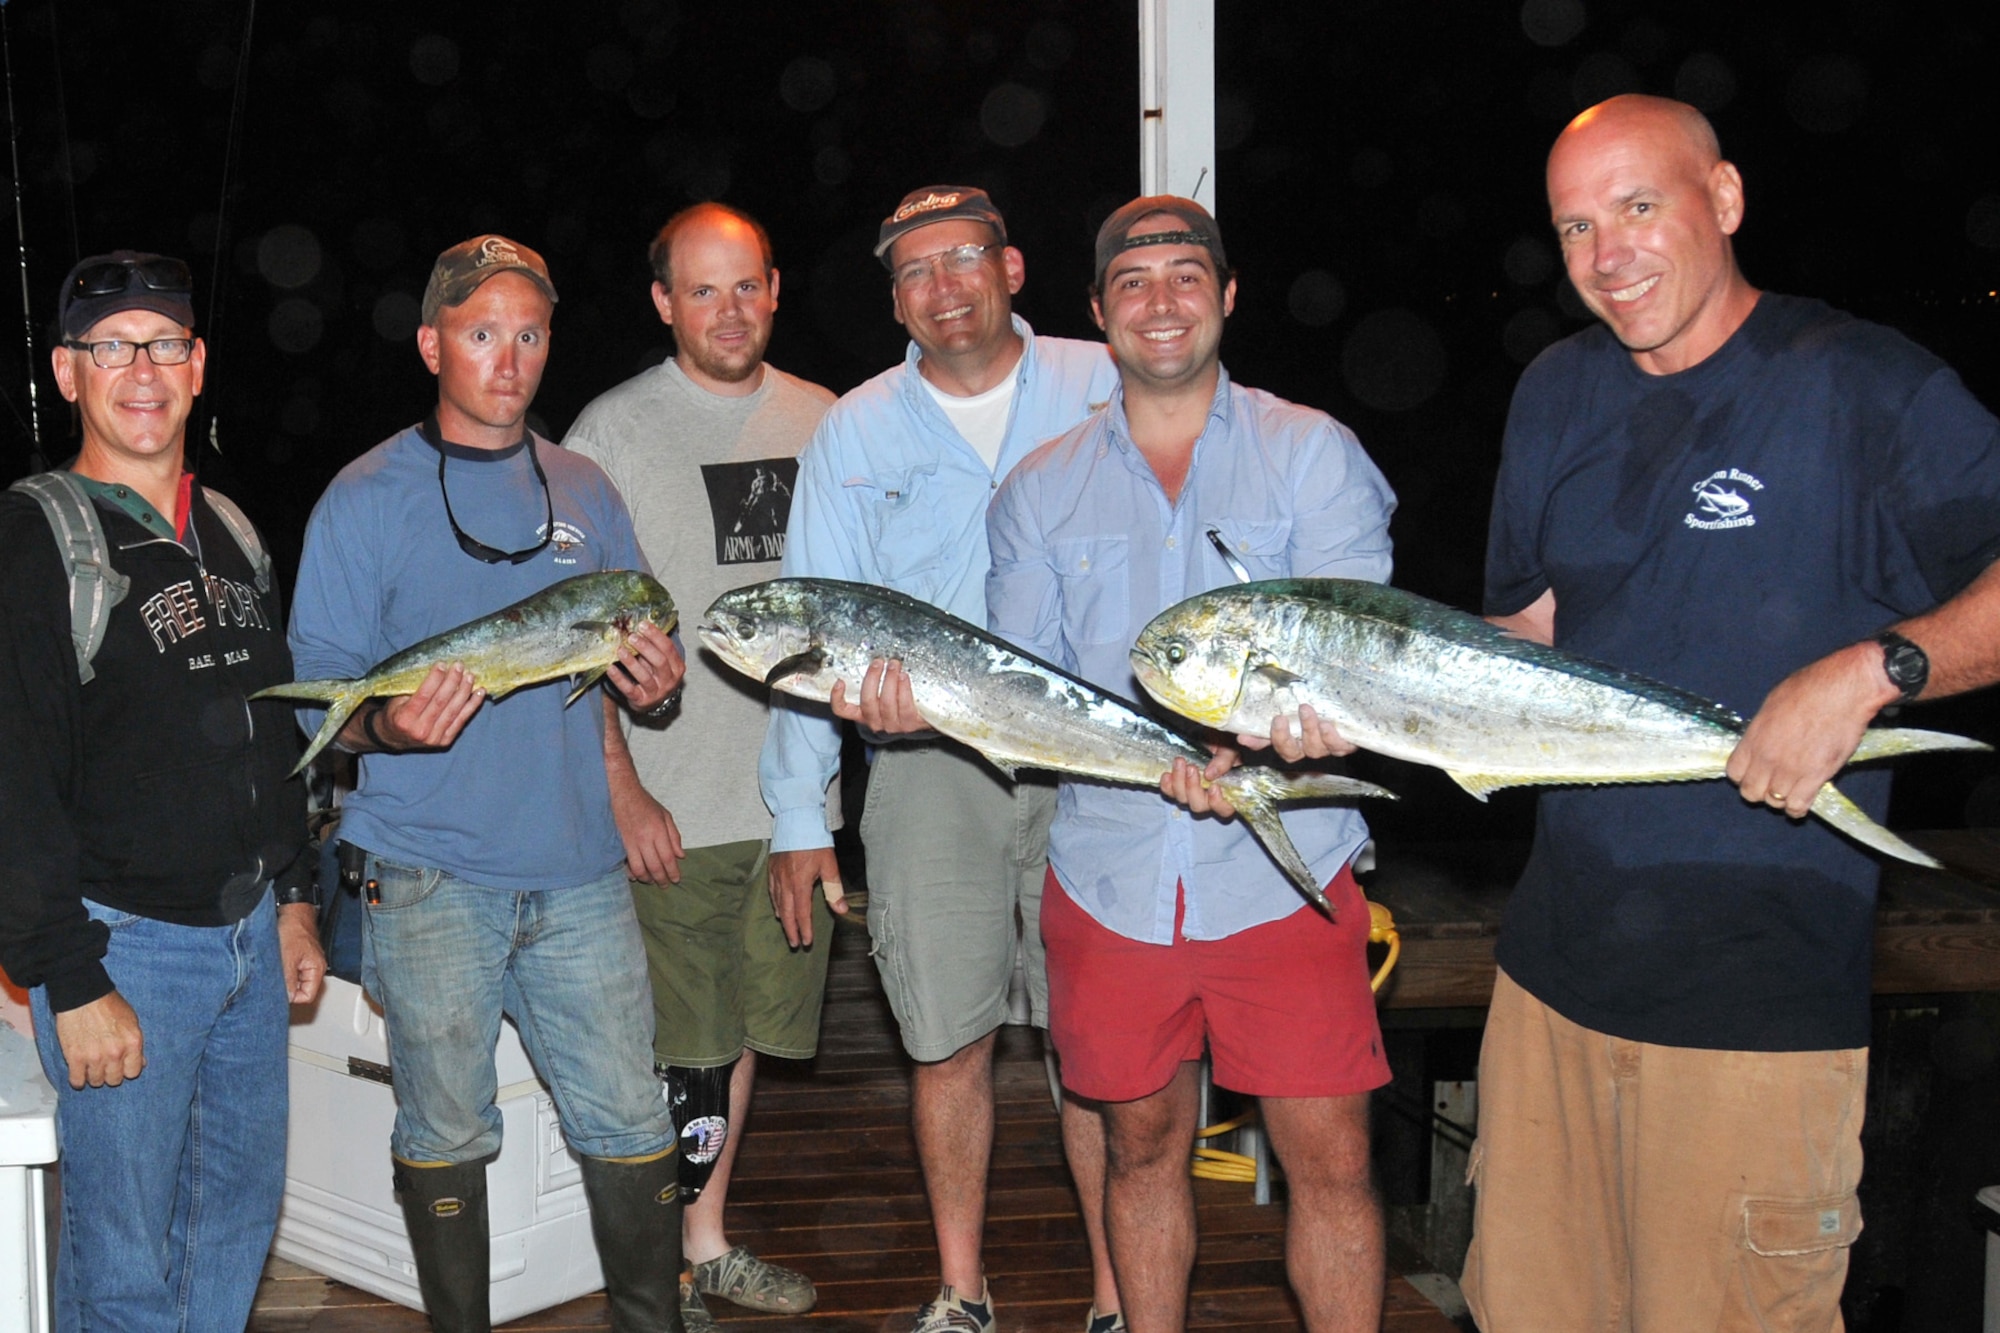 A picture of retired Active Duty and current New Jersey Army and Air National Guard members displaying their catch of mahi mahi.